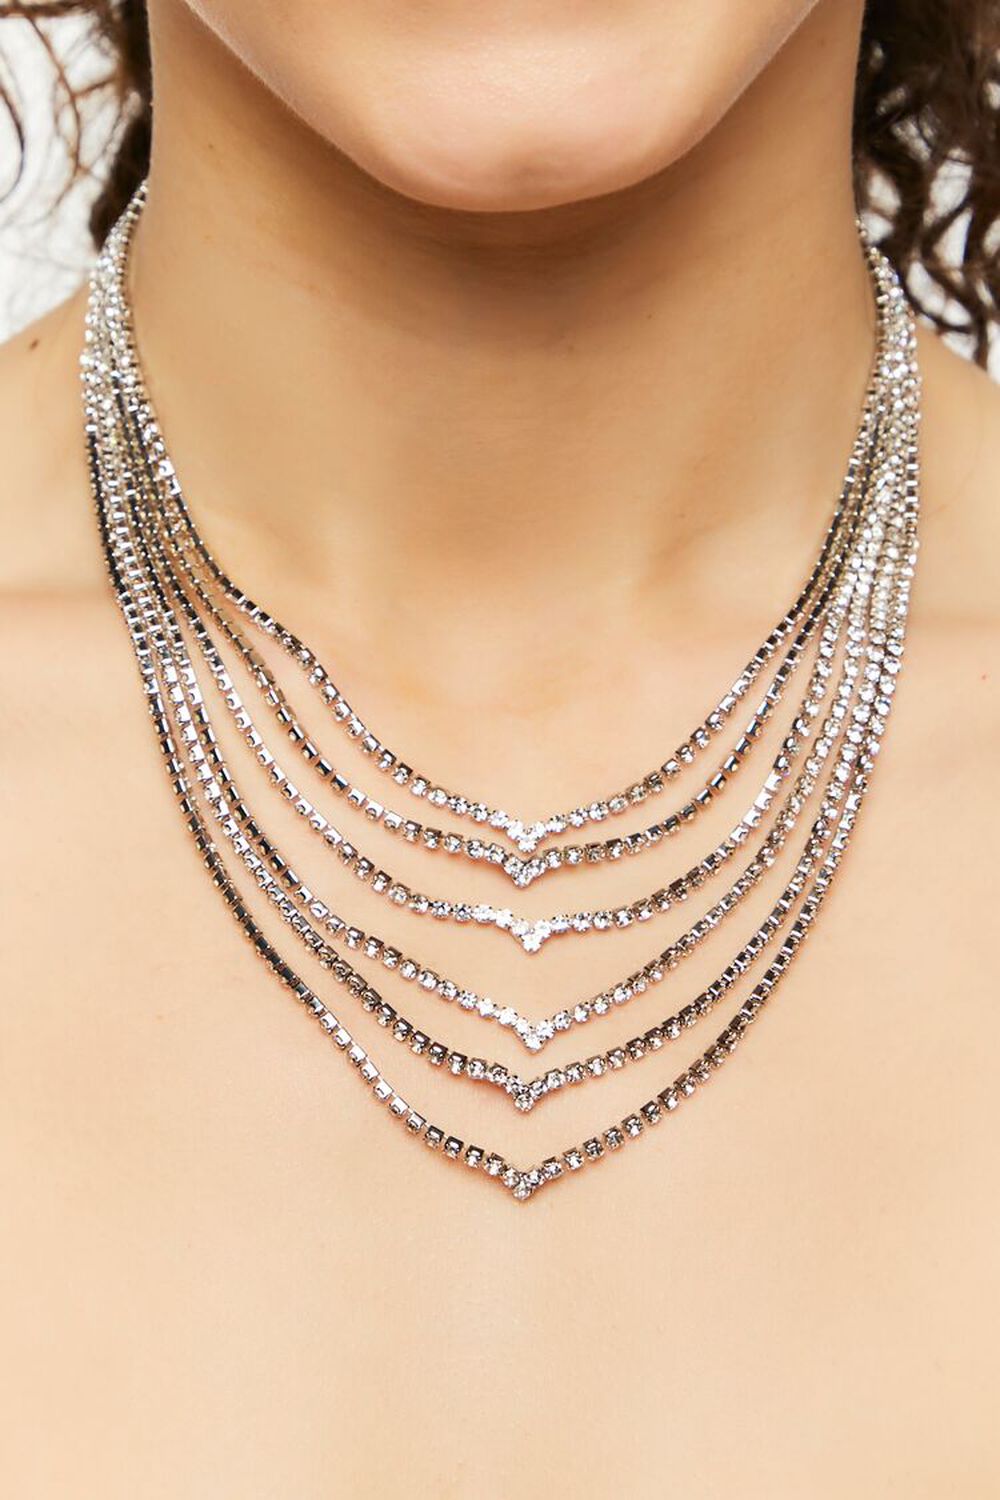 SILVER Layered Rhinestone Tiered Necklace, image 1